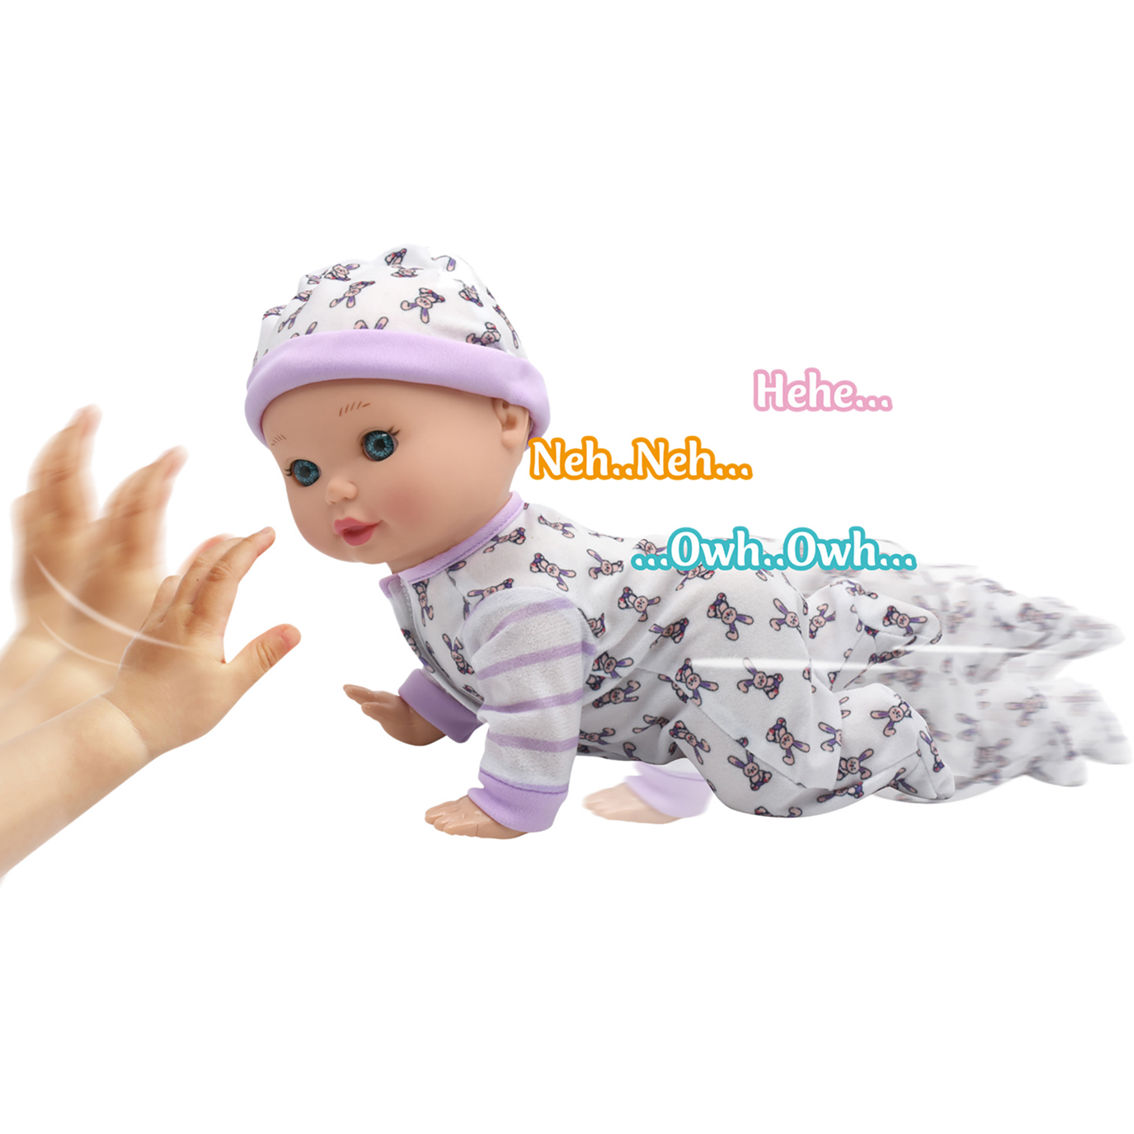 New Adventures Little Darlings: Crawling Baby Playset with Baby Doll - Image 4 of 7